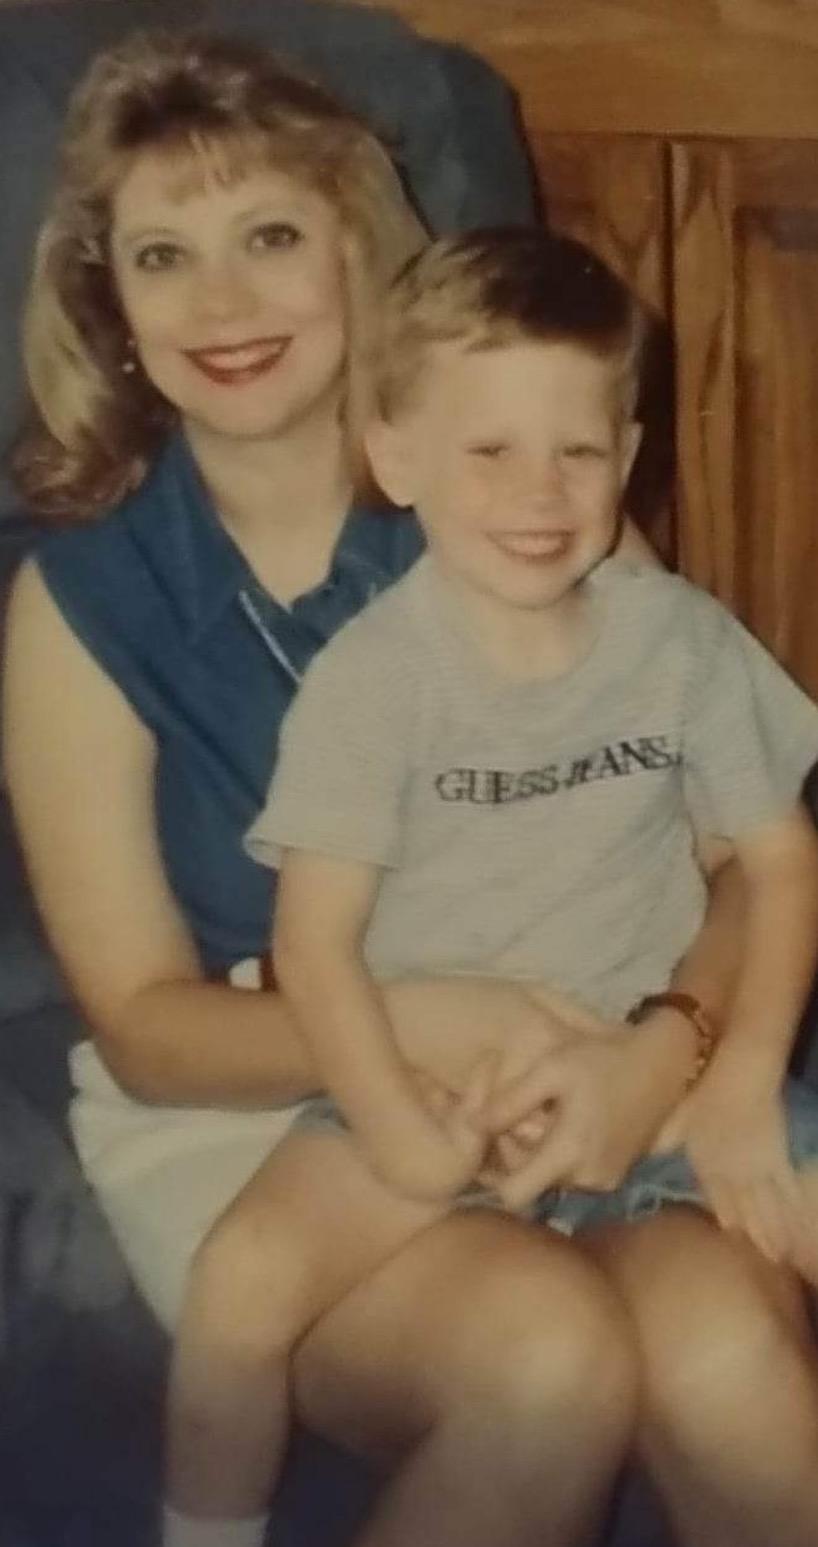 Todd Youngblood with his mother, Melody, when he was a kid. (Courtesy of <a href="https://www.instagram.com/_toddyoungblood">Todd Youngblood</a>)